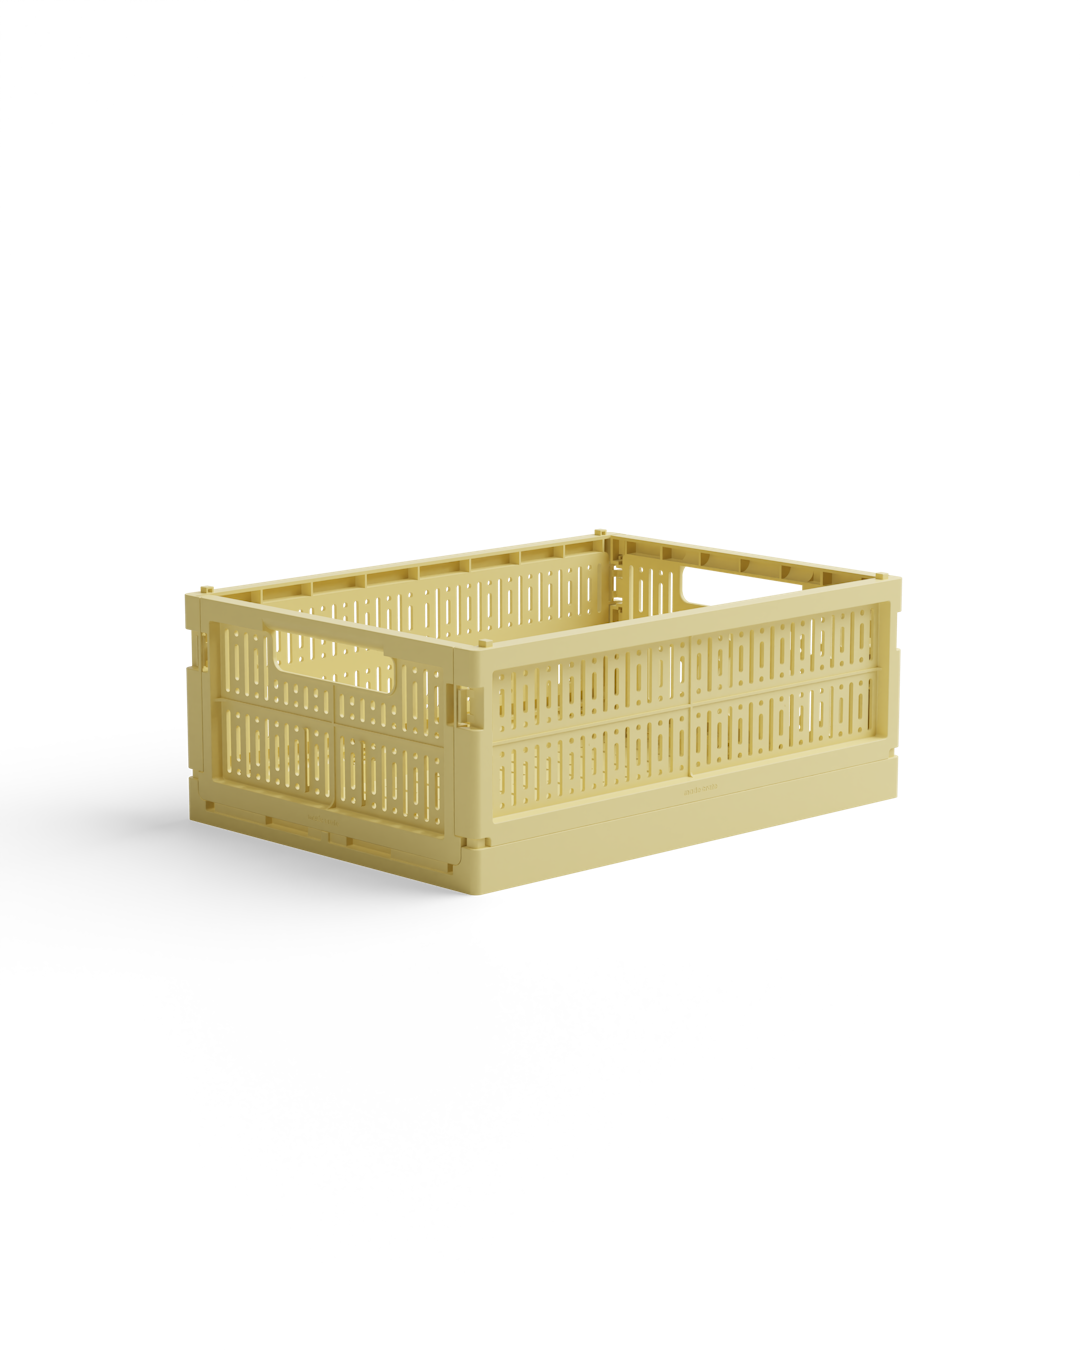 Made Crate Faltkisten Stackable Storage Boxes - Midi